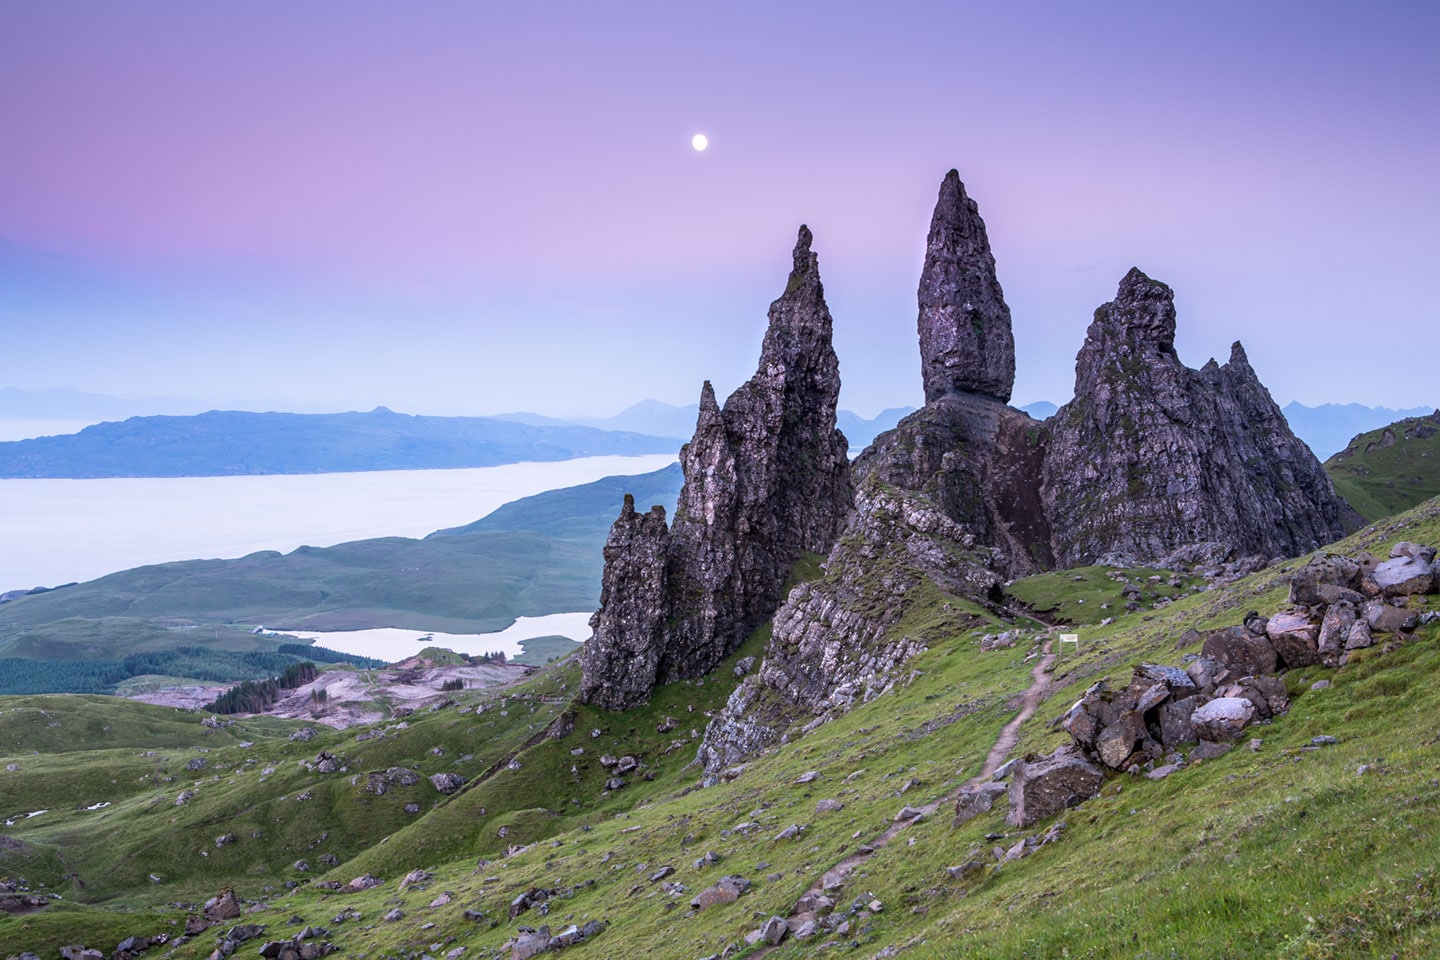 Dawn over the Old man of Storr at the Isle of Skye, Scotland